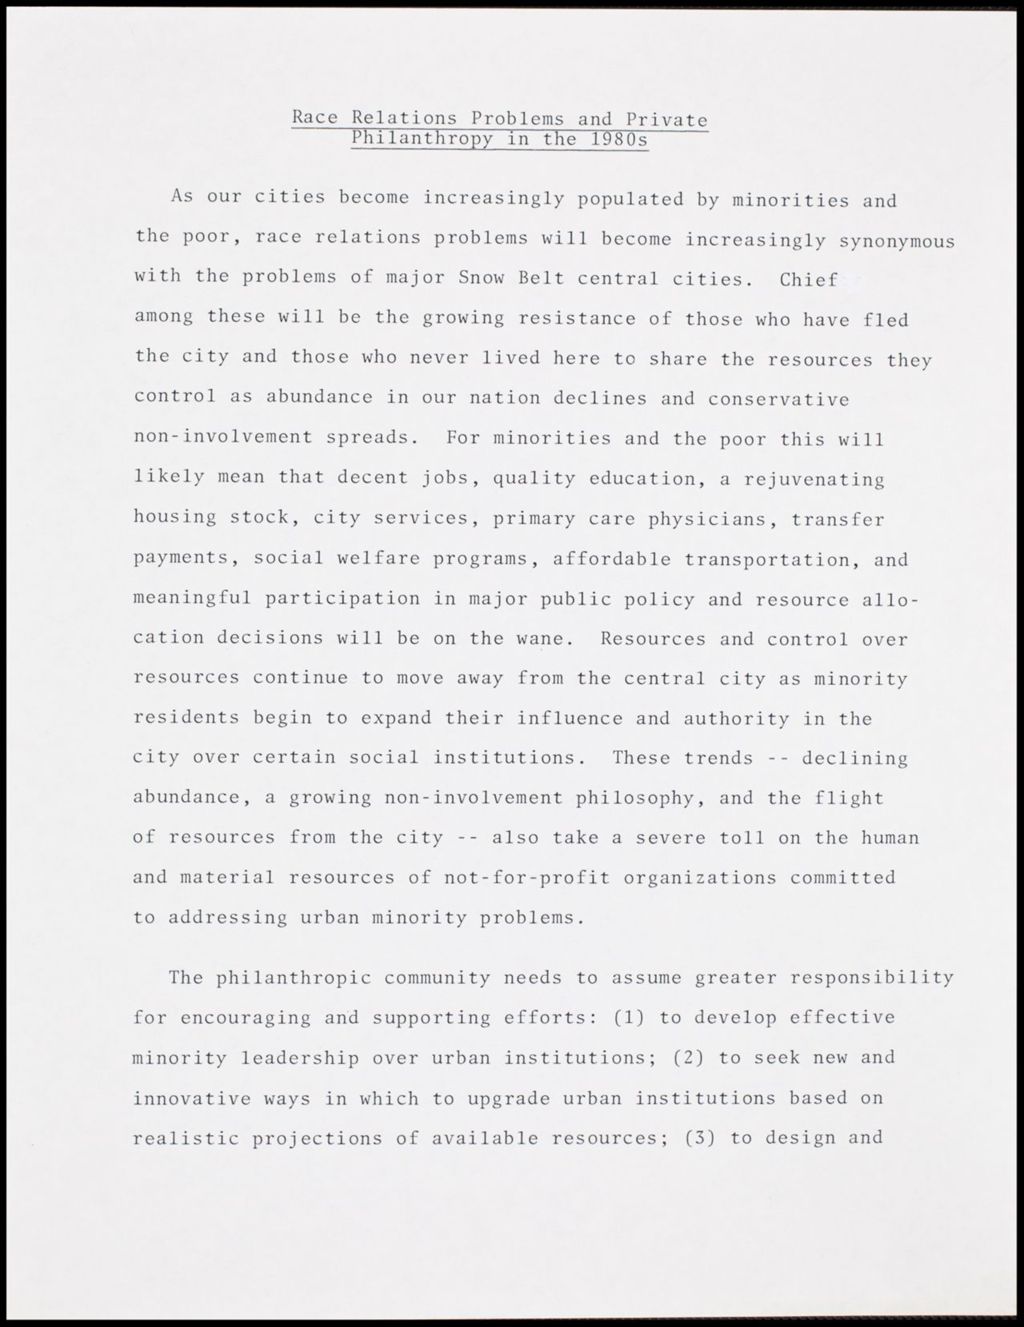 Race Relations Private Philanthropy in the 1980's, 1981 (Folder III-1841)